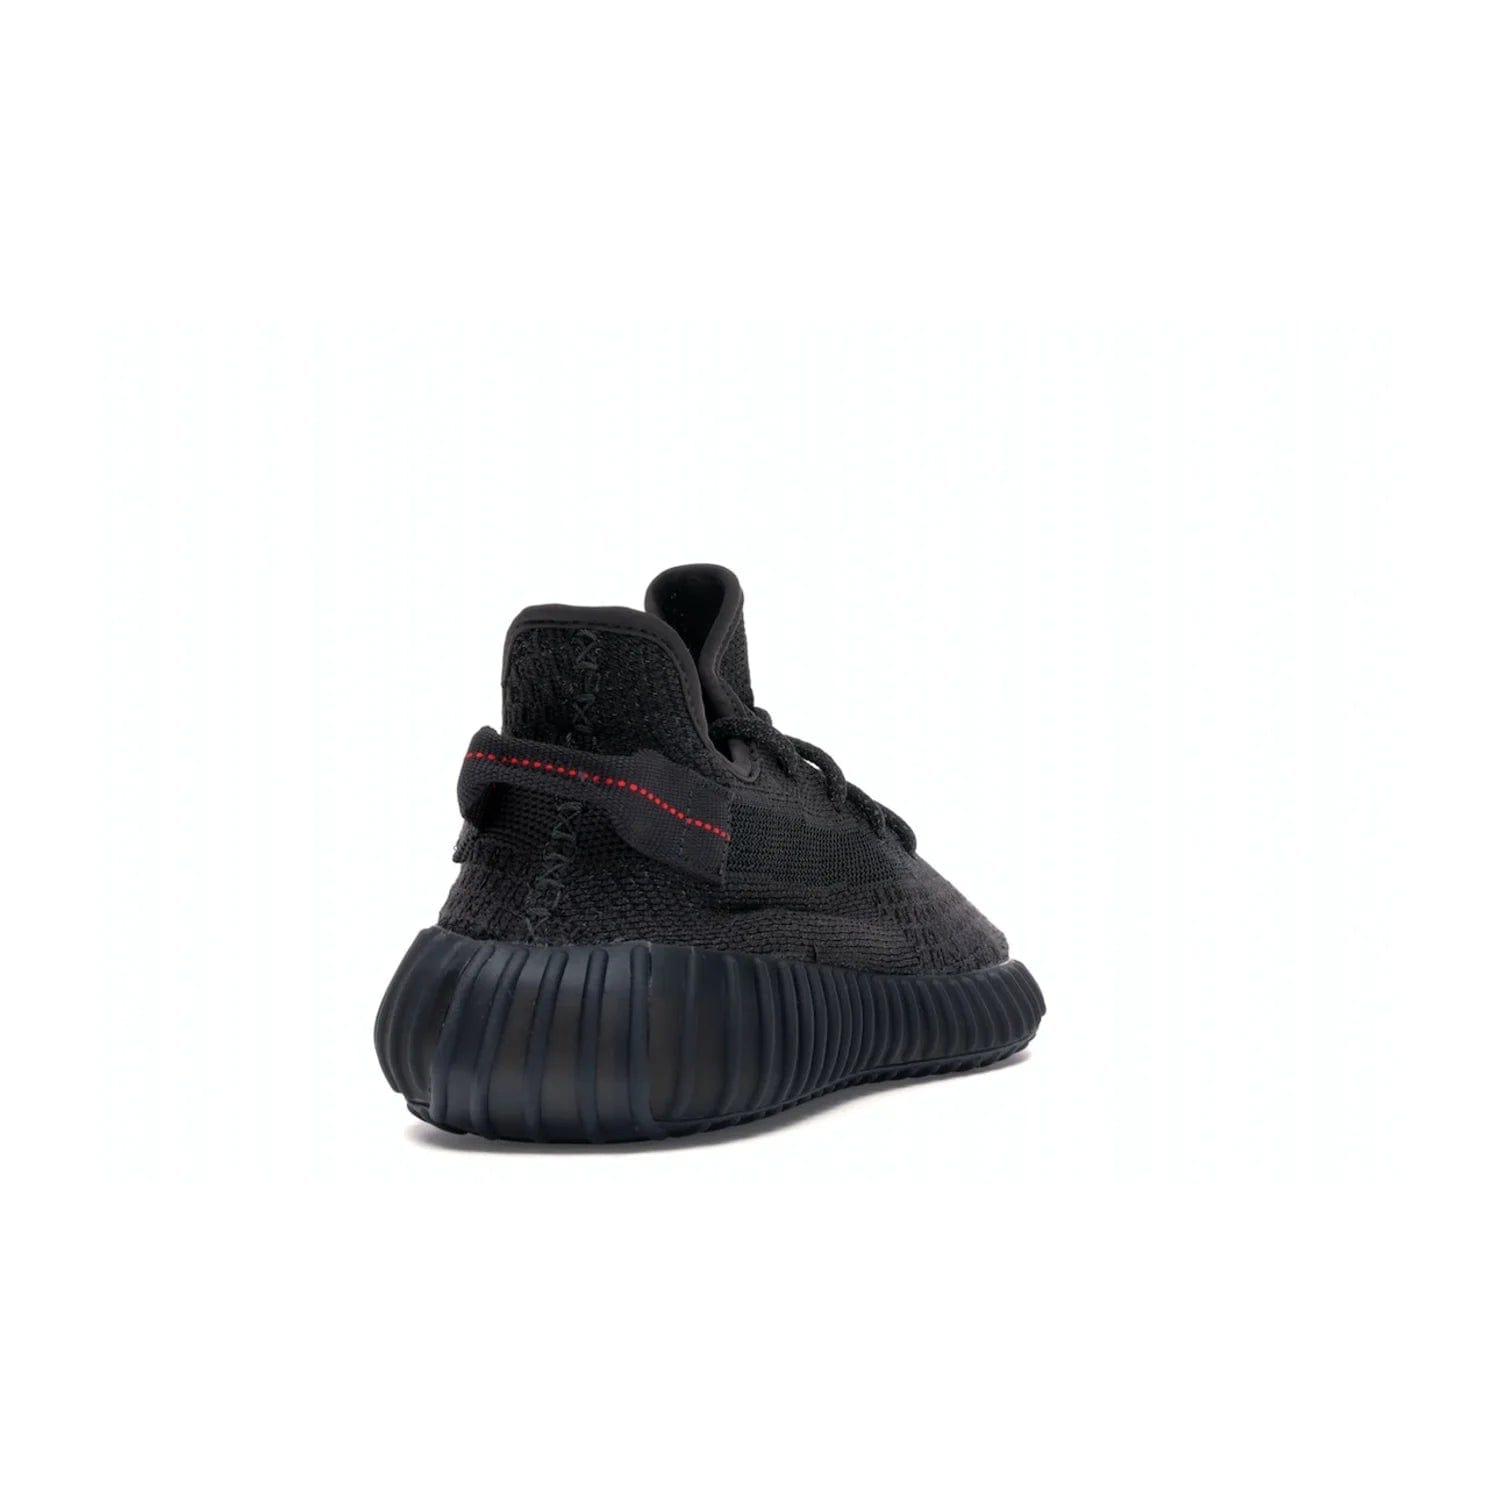 adidas Yeezy Boost 350 V2 Static Black (Reflective) - Image 30 - Only at www.BallersClubKickz.com - Make a statement with the adidas Yeezy Boost 350 V2 Static Black Reflective. All-black upper, reflective accents, midsole, and sole combine for a stylish look. High quality materials. June 2019 release. Add to your collection today.